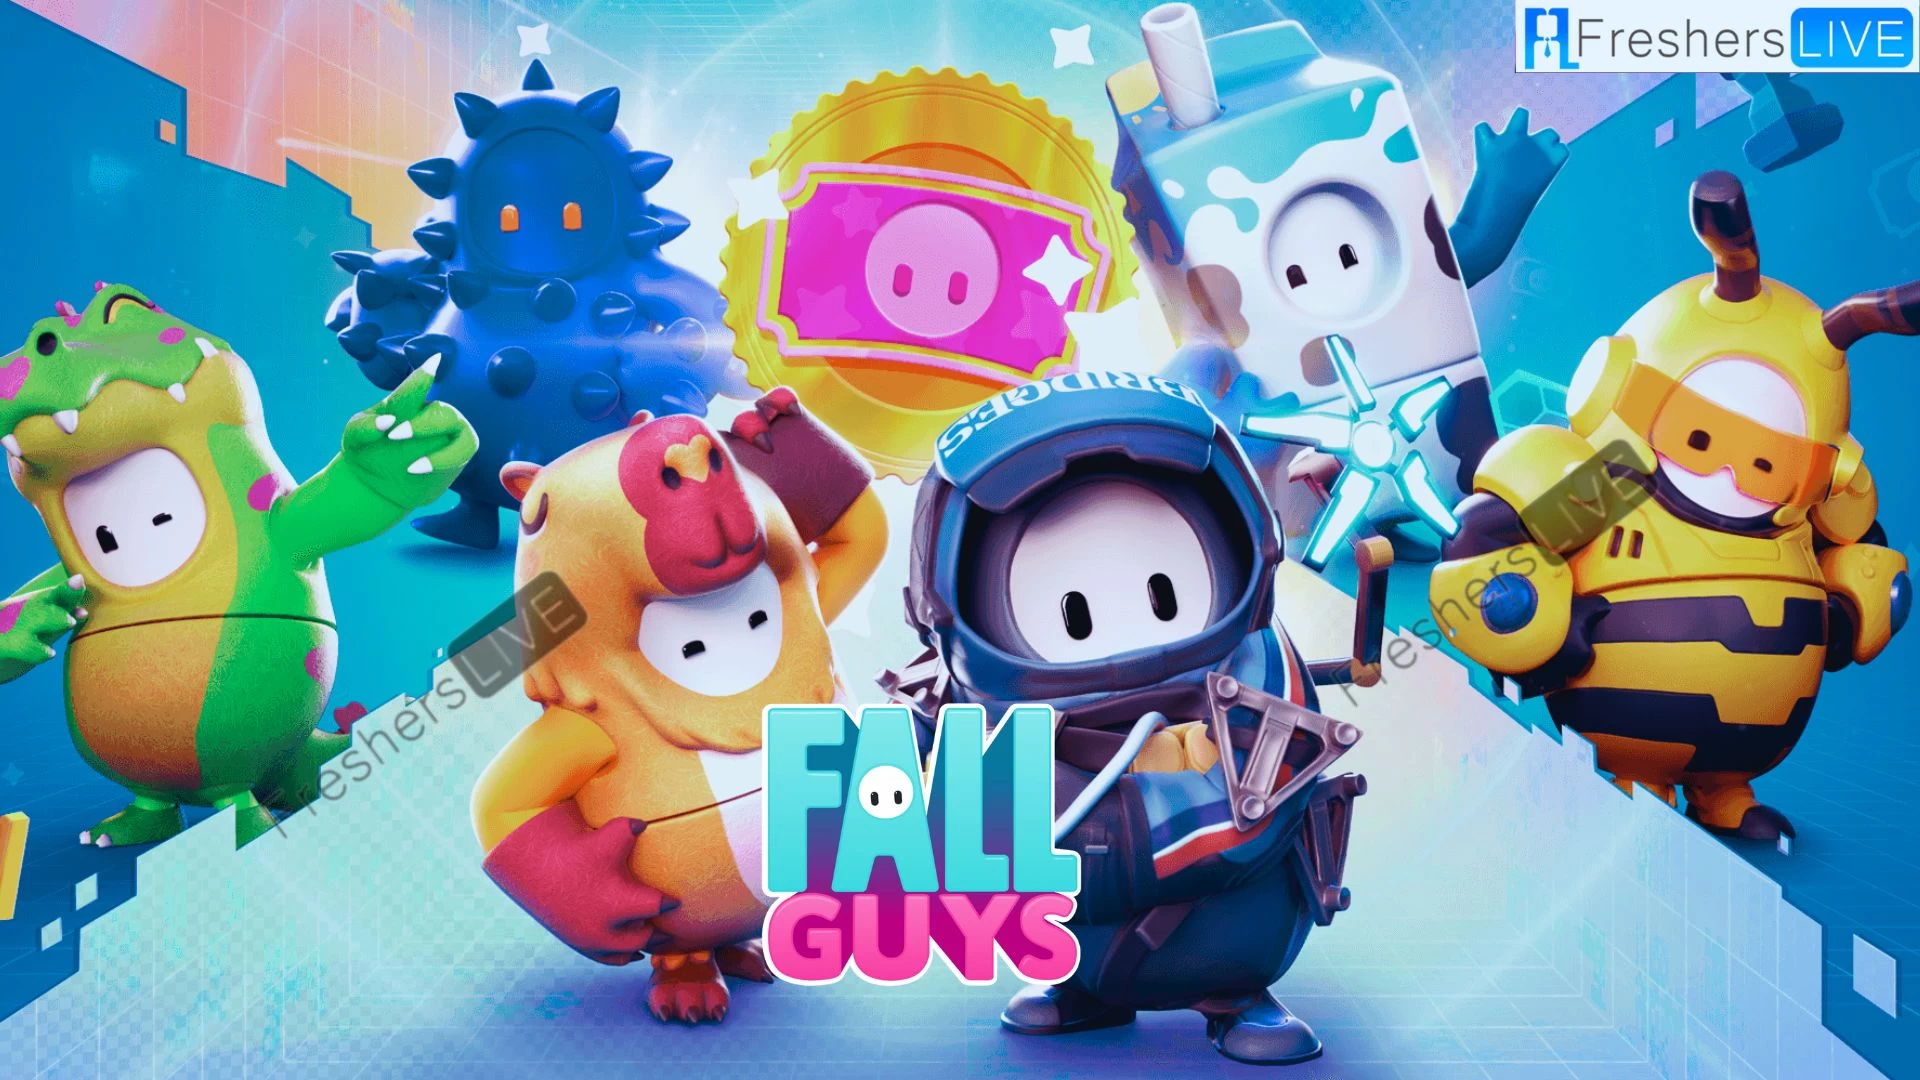 Fall Guys Stuck on Loading Screen, Why is Fall Guys Not Loading? How to Fix Fall Guys Not Loading?